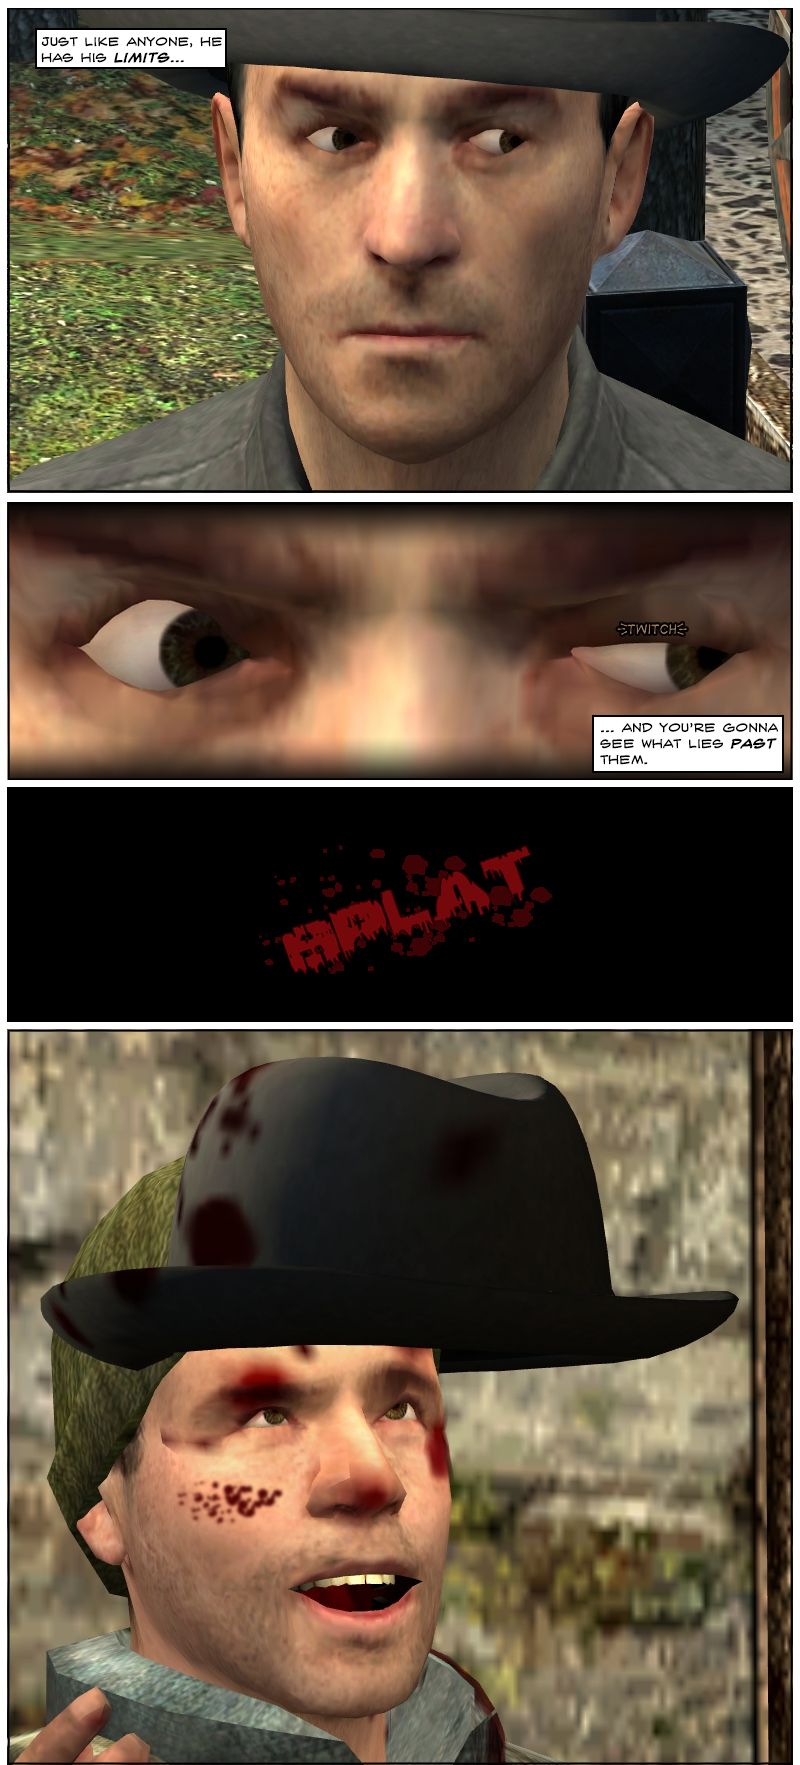 Mythos stares at them with an angry look, then his left eye twitches as the narrator explains that, just like anyone, he has his limits and you're gonna see what lies past them. Suddenly, the sound of blood splatter is heard. The first guy, still with a laughing expression, has Mythos' hat lodged in his forehead.